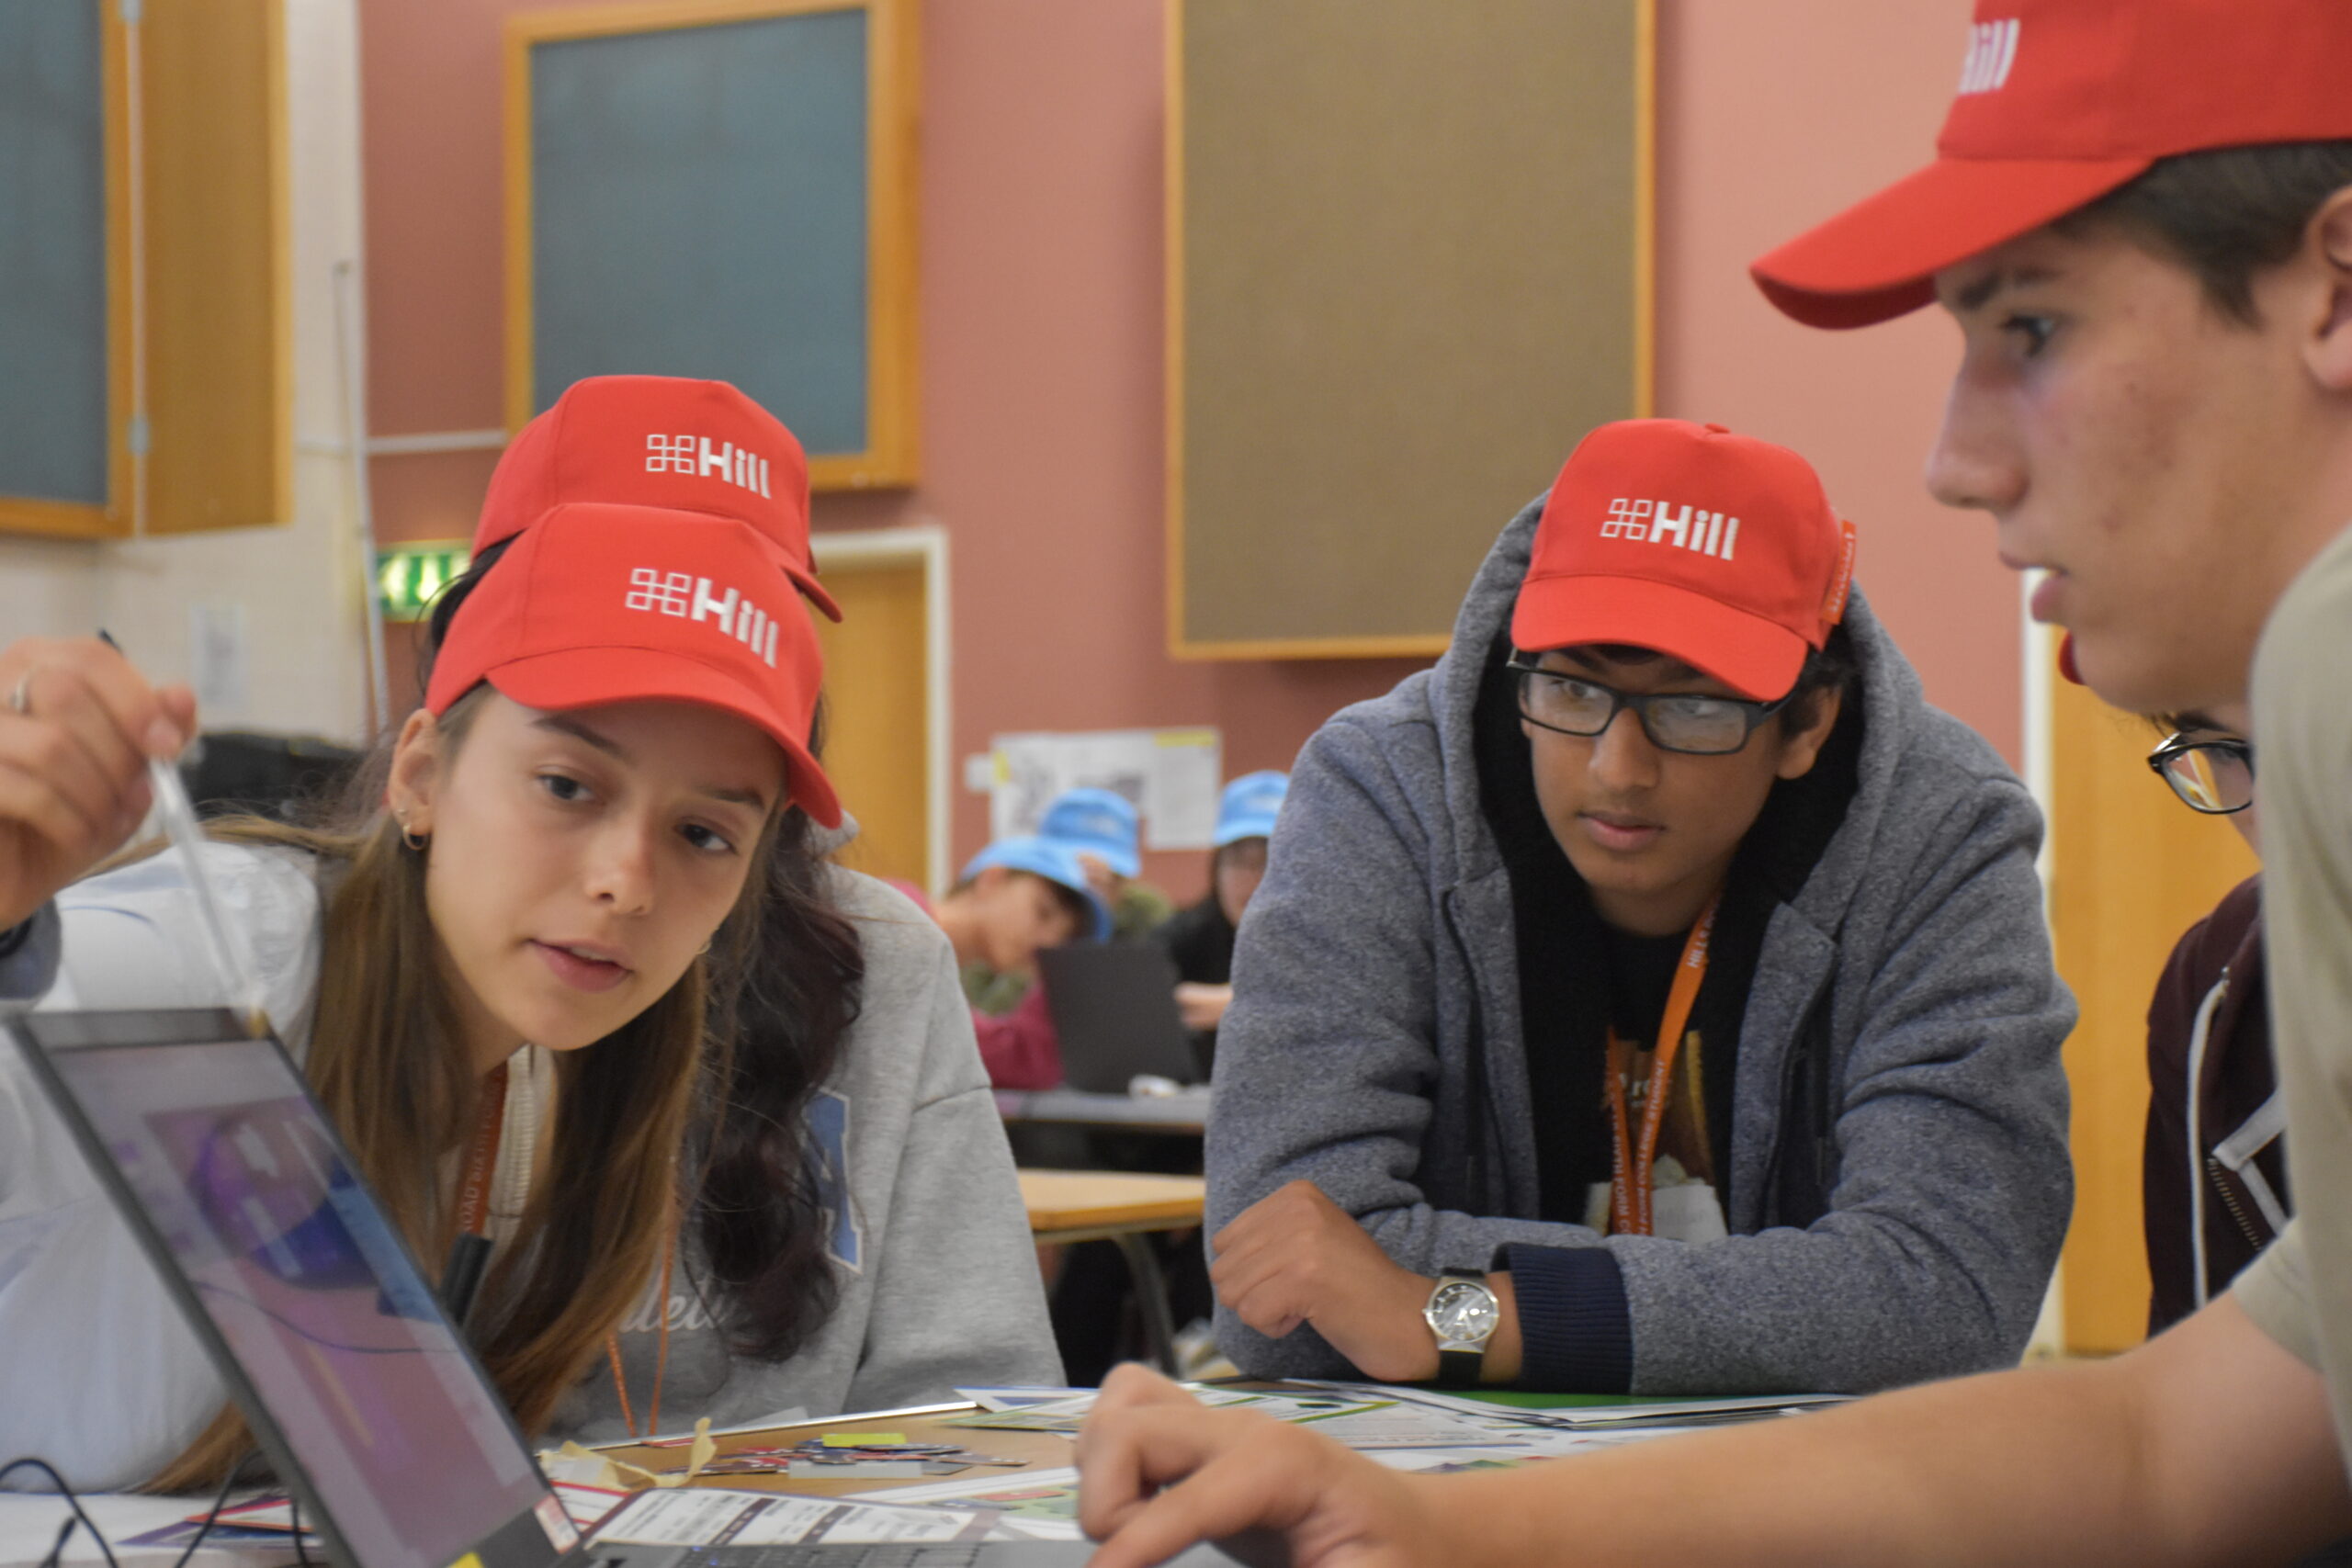 Students working together with red hats